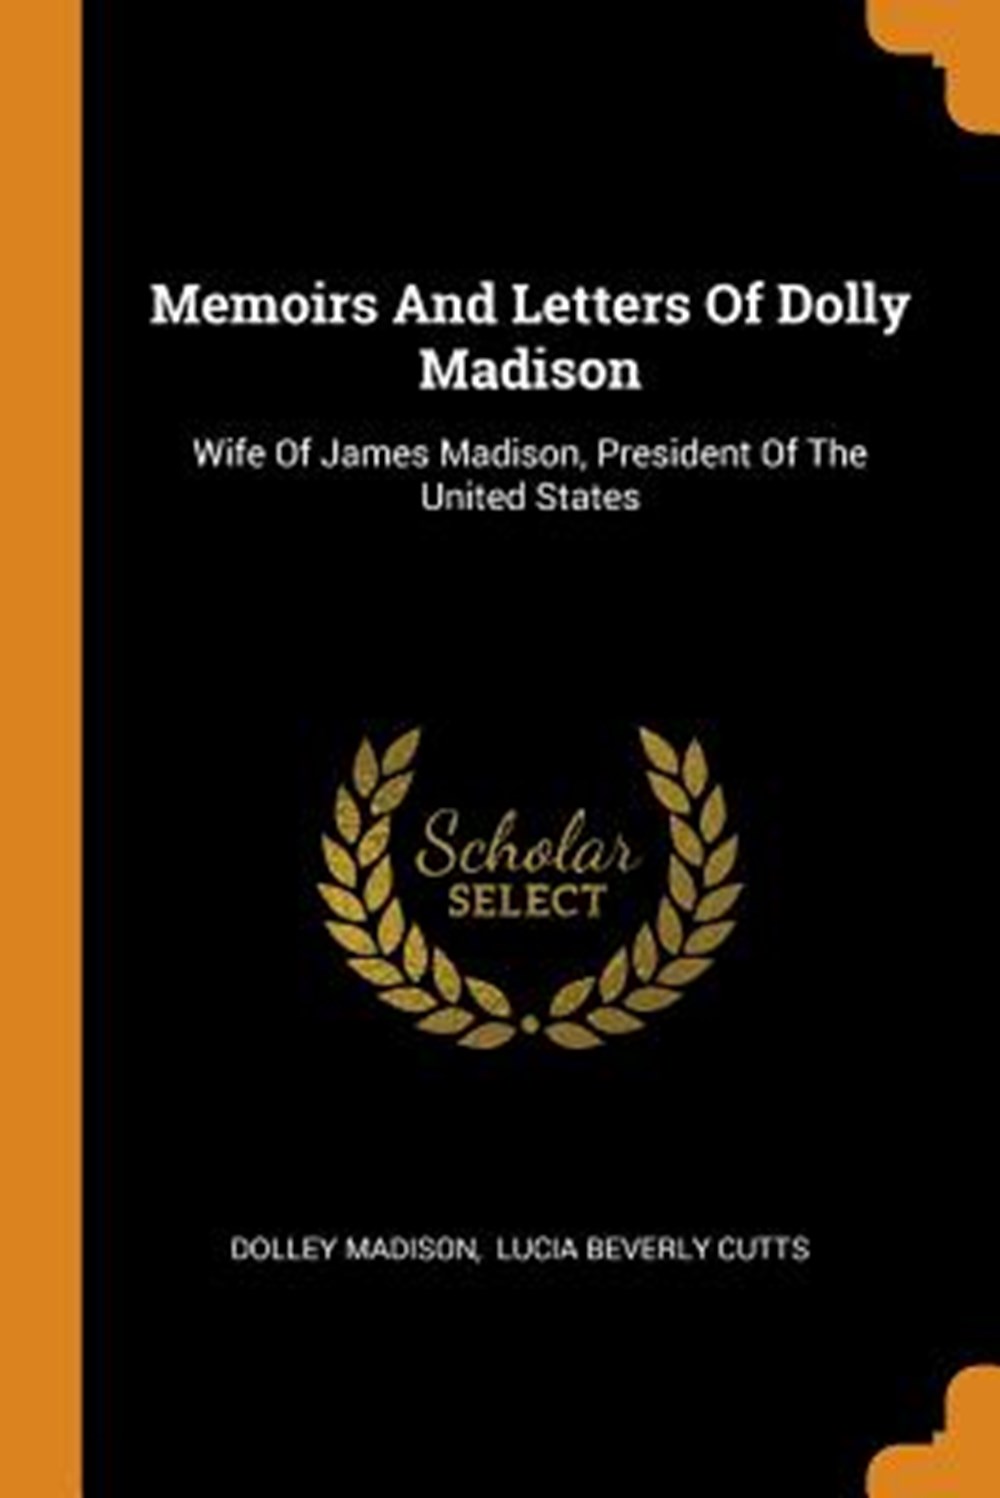 Memoirs and Letters of Dolly Madison Wife of James Madison, President of the United States